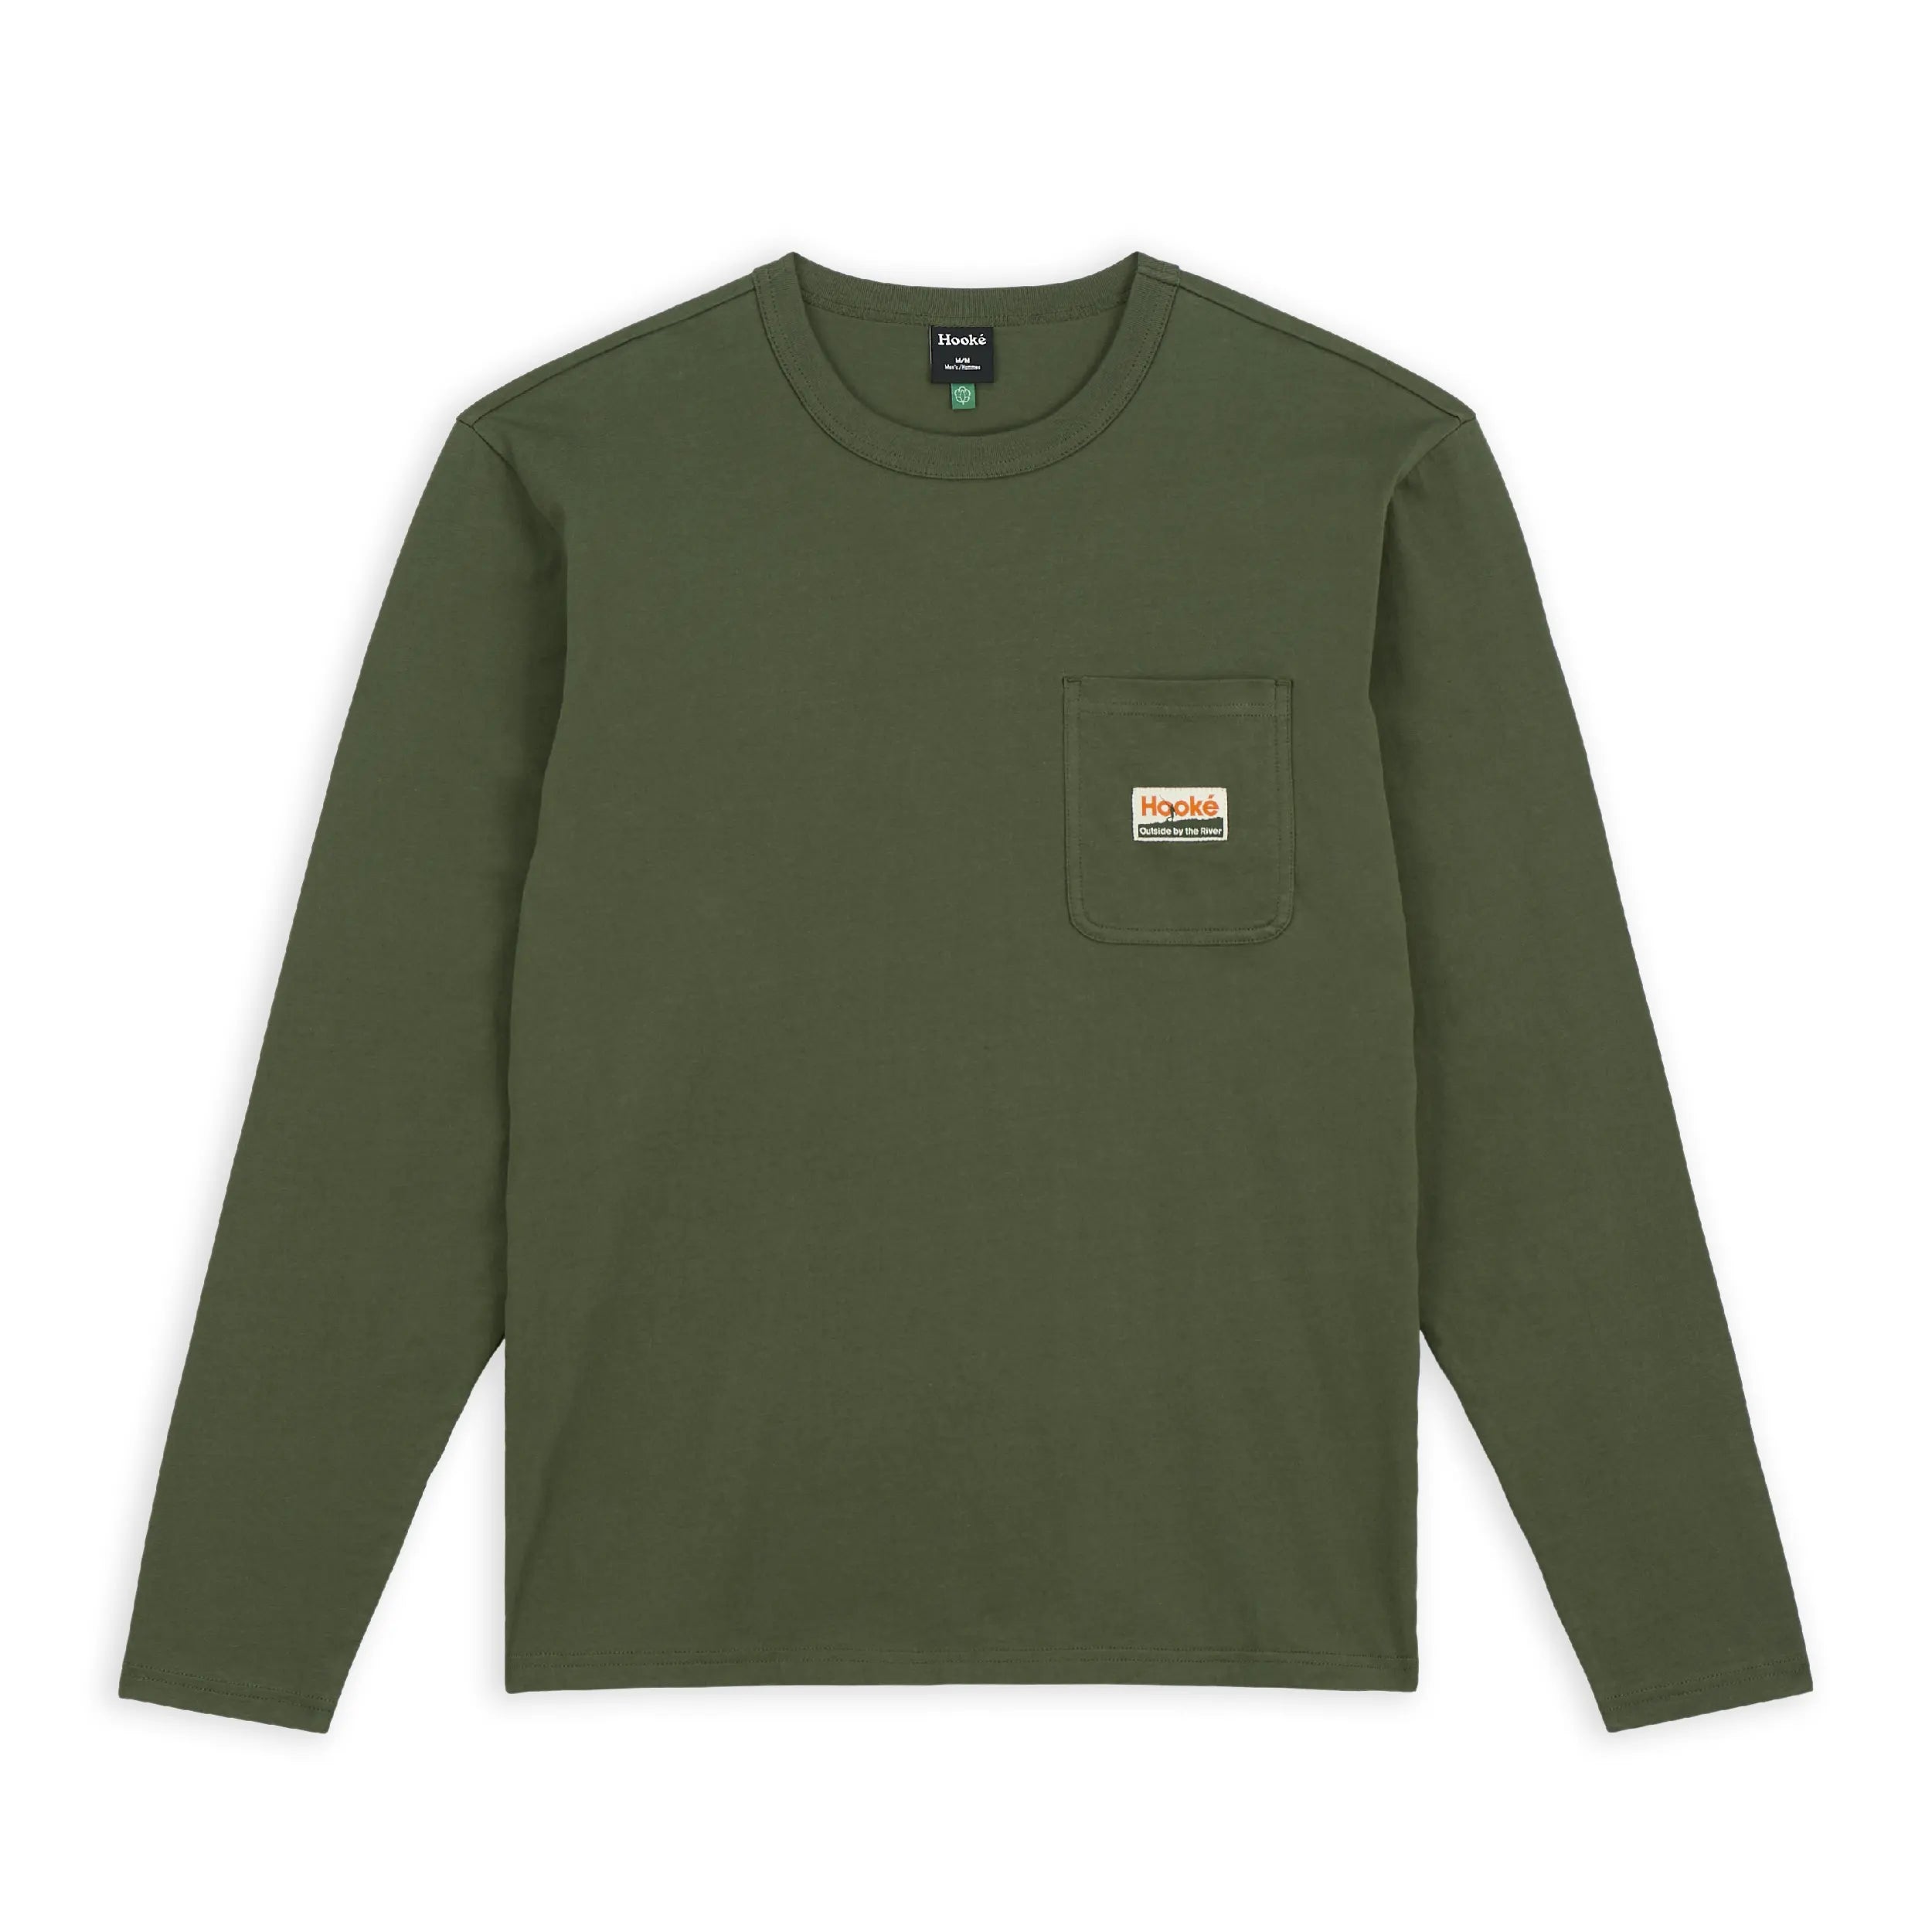 M's Outside by the River Long Sleeve Pocket Tee - Hooké